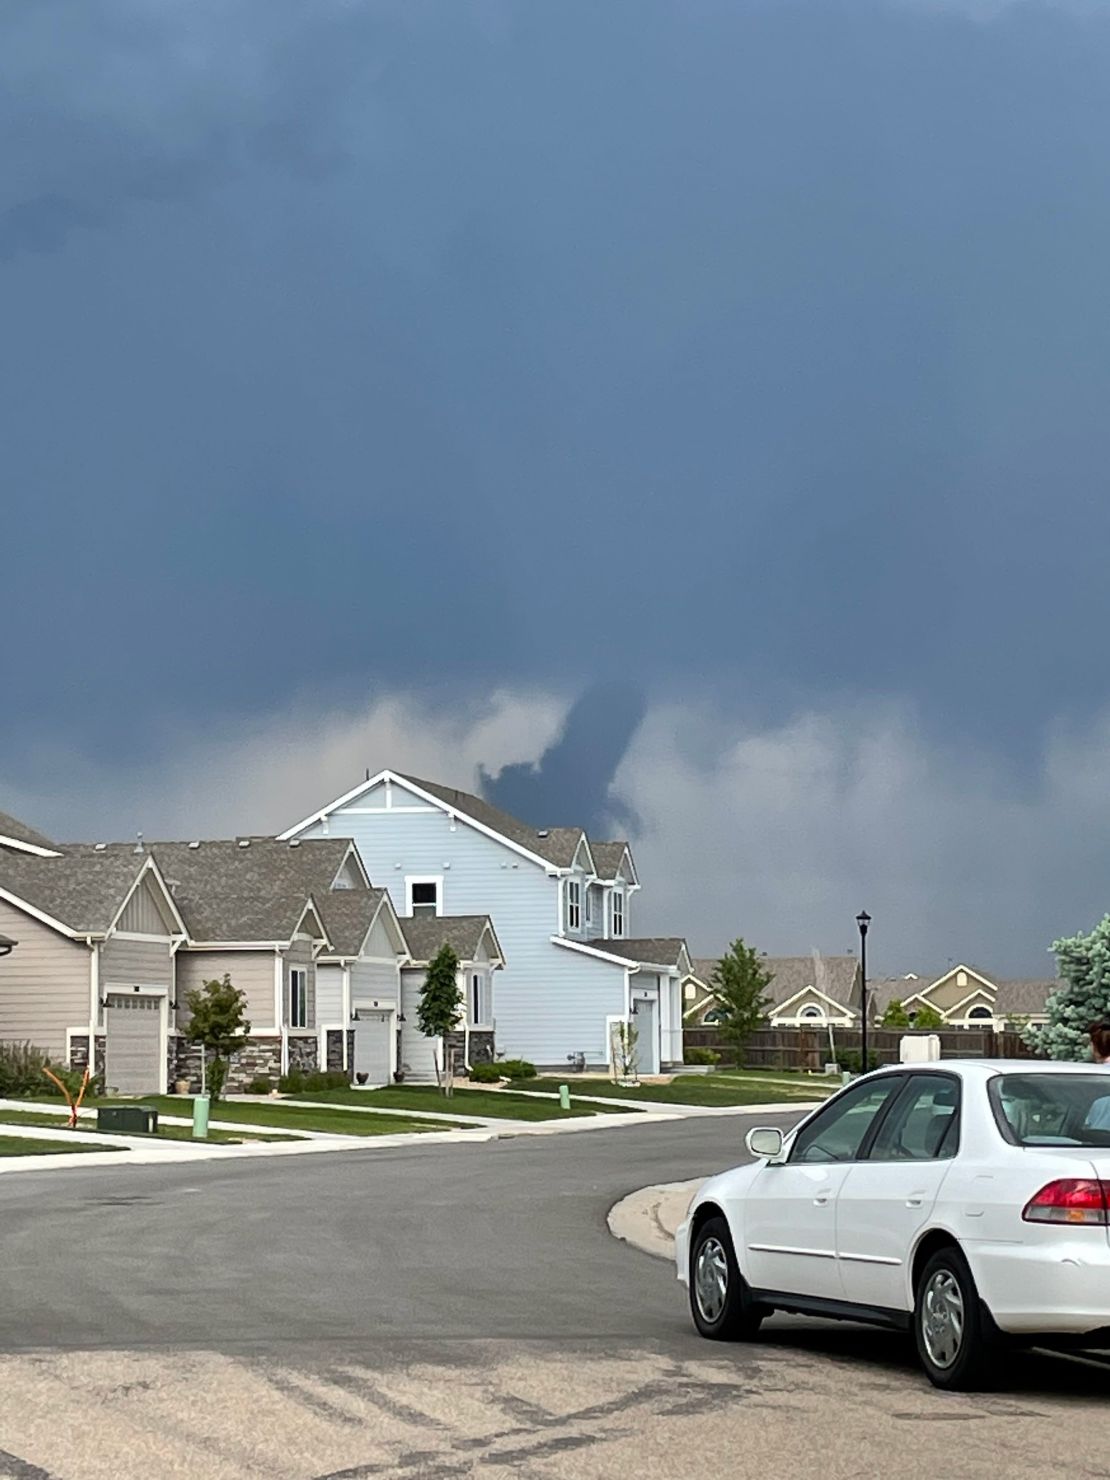 A National Weather Service employee snapped this photo of the tornado.